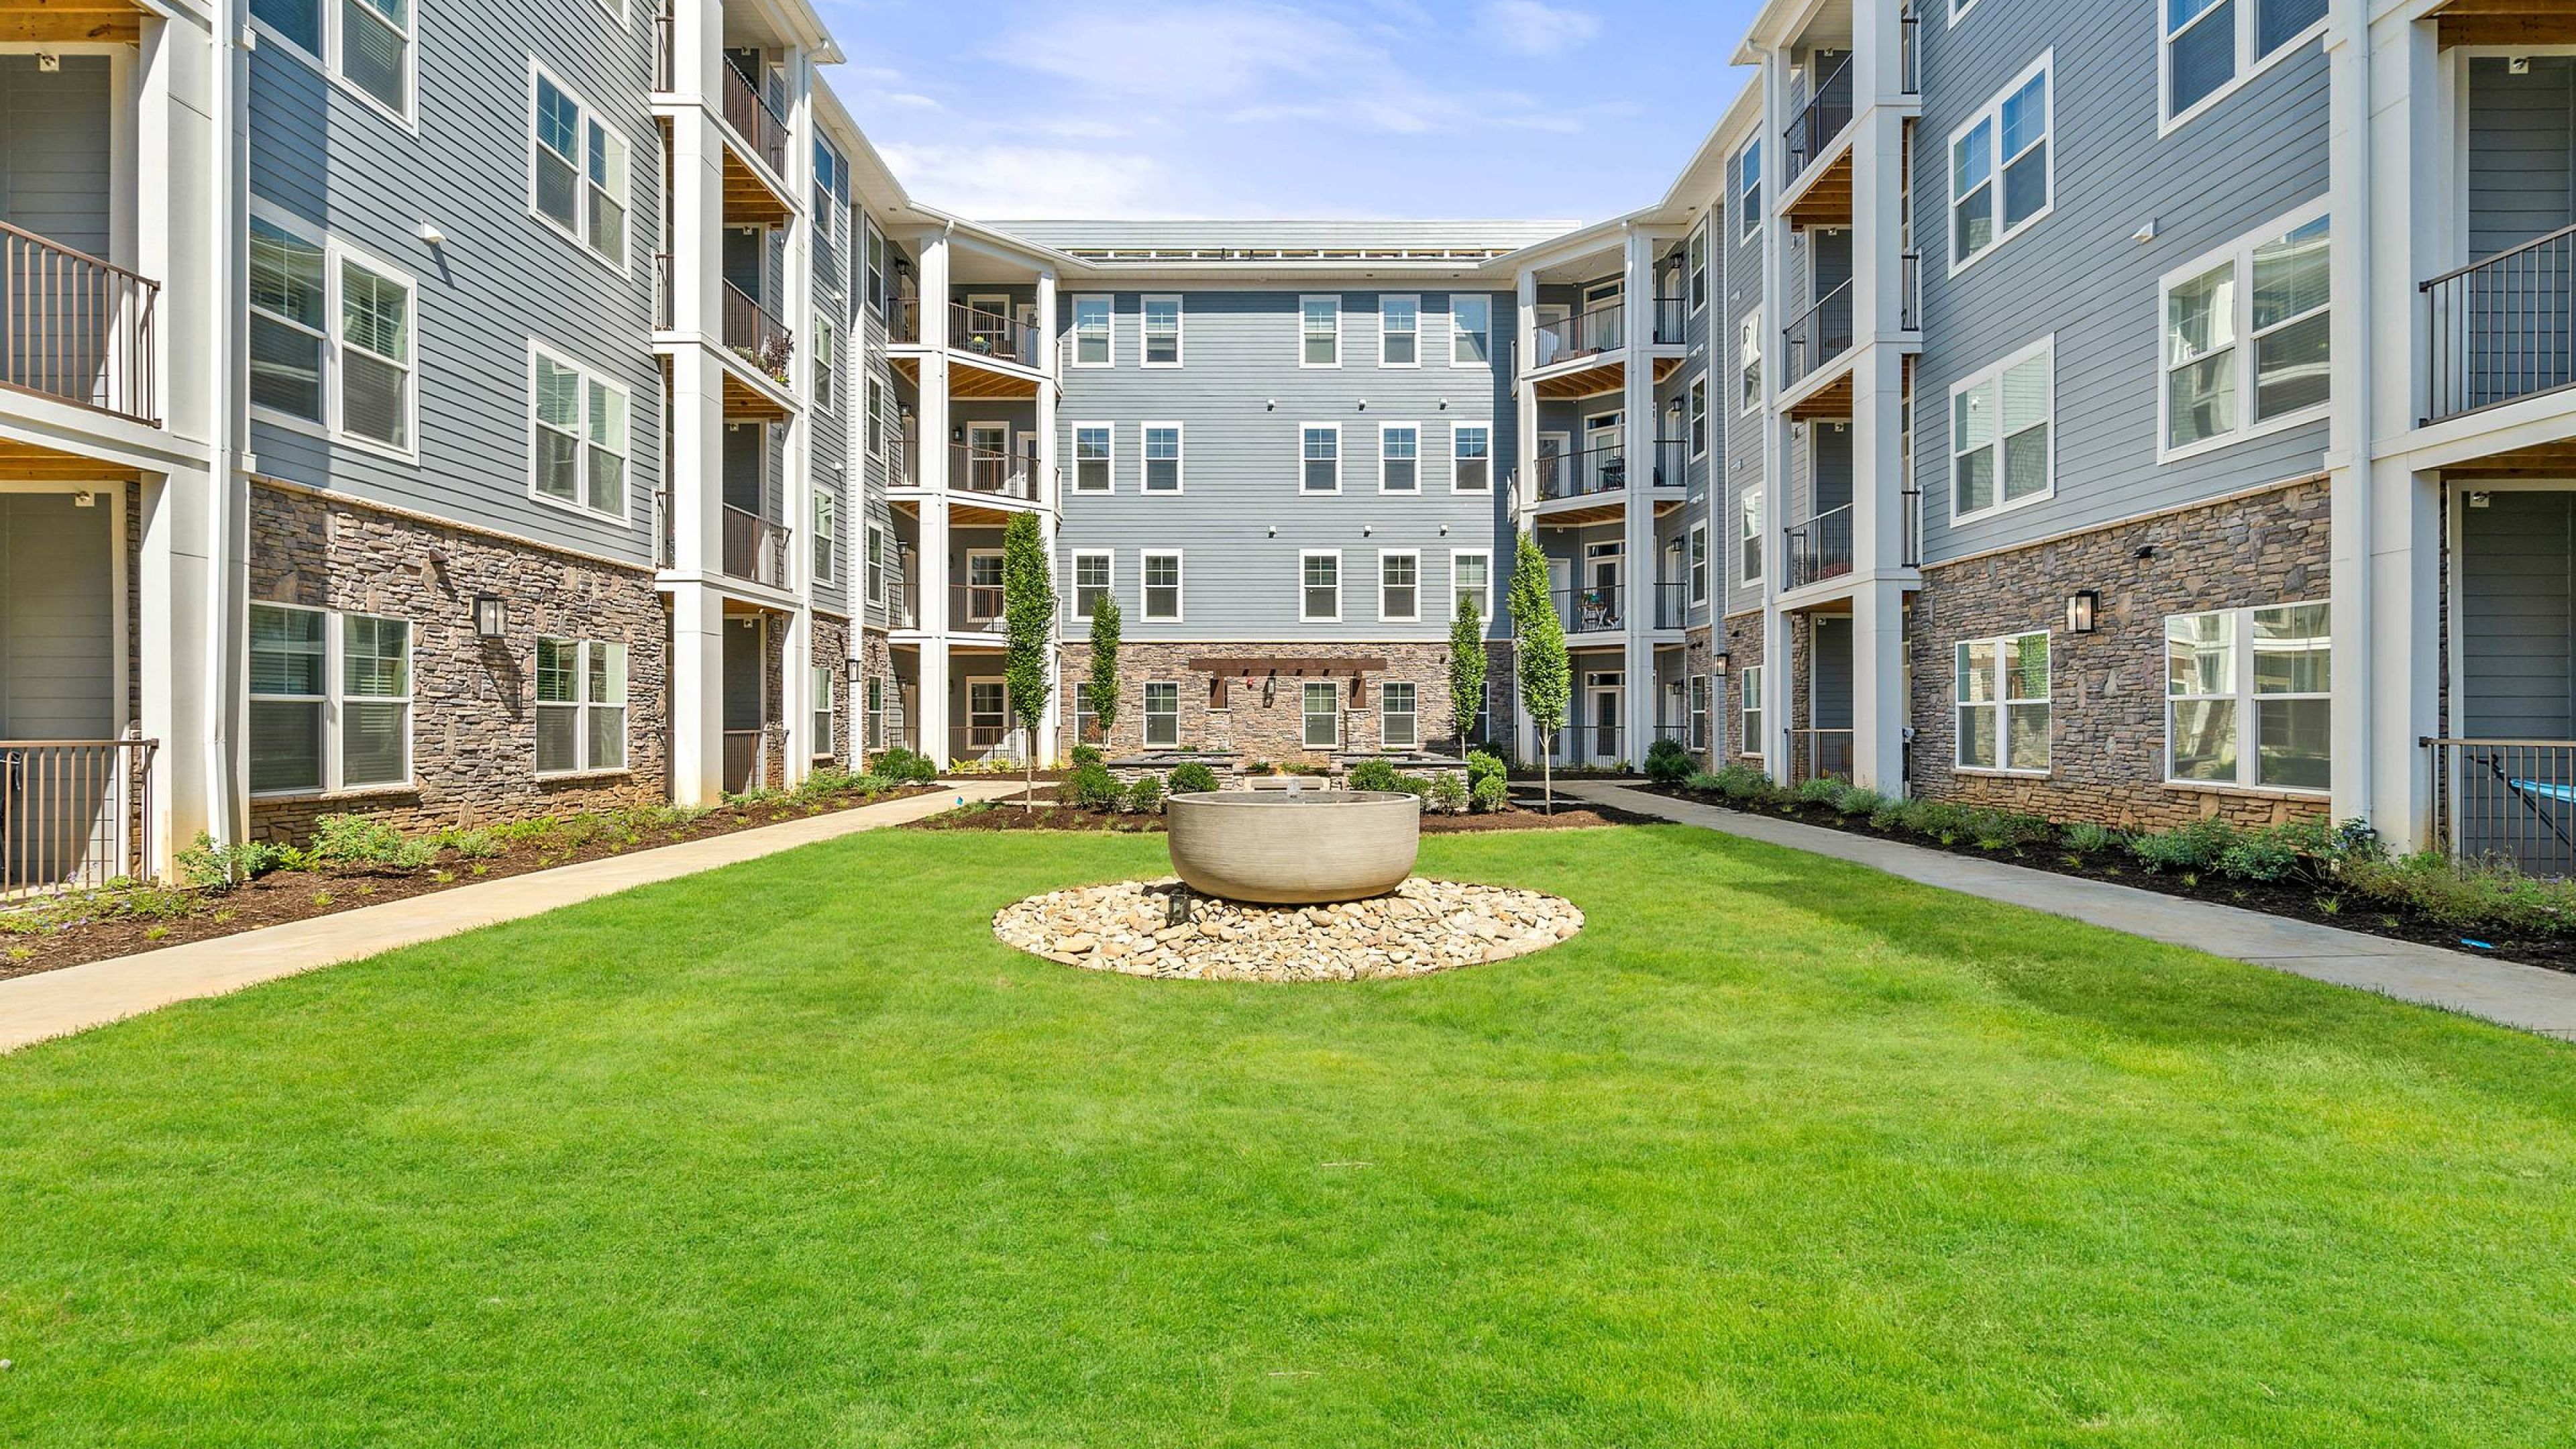 Hawthorne at Mills Gap apartments community exterior with large green lawn